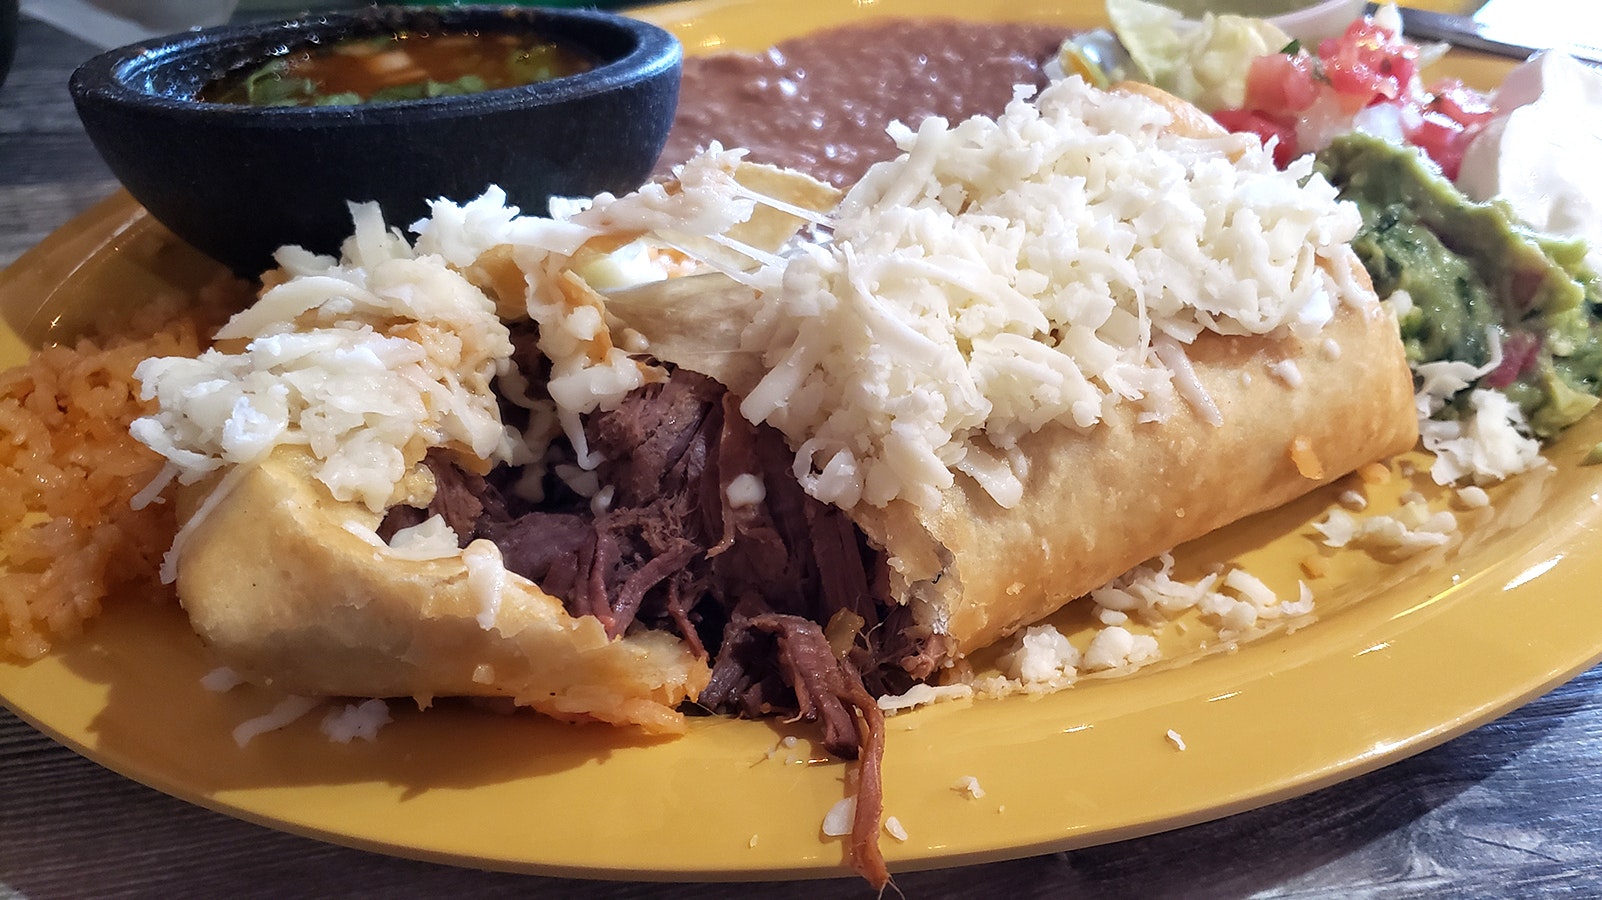 A yak meat chimichanga is among yak dishes on the menu at Tacos Mexico.